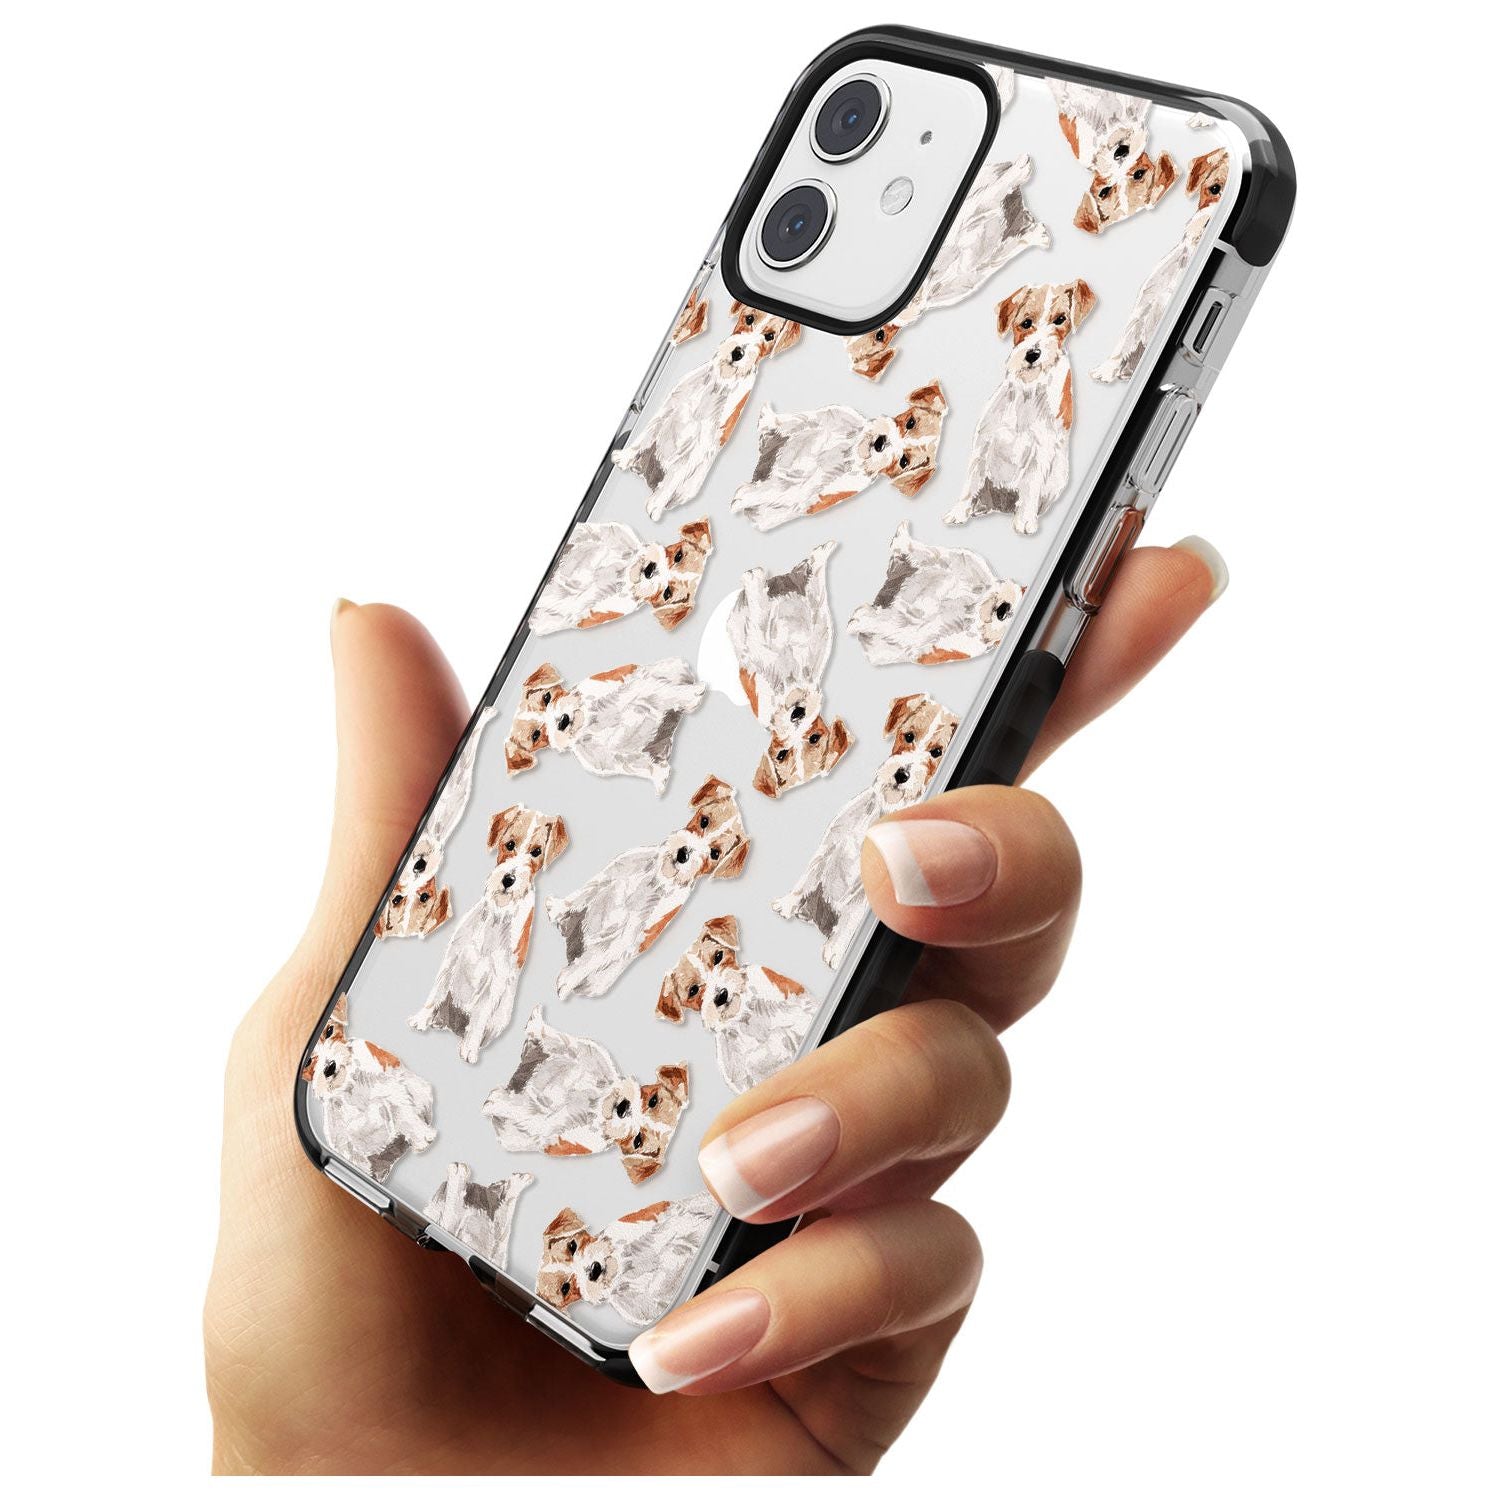 Wirehaired Jack Russell Watercolour Dog Pattern Black Impact Phone Case for iPhone 11